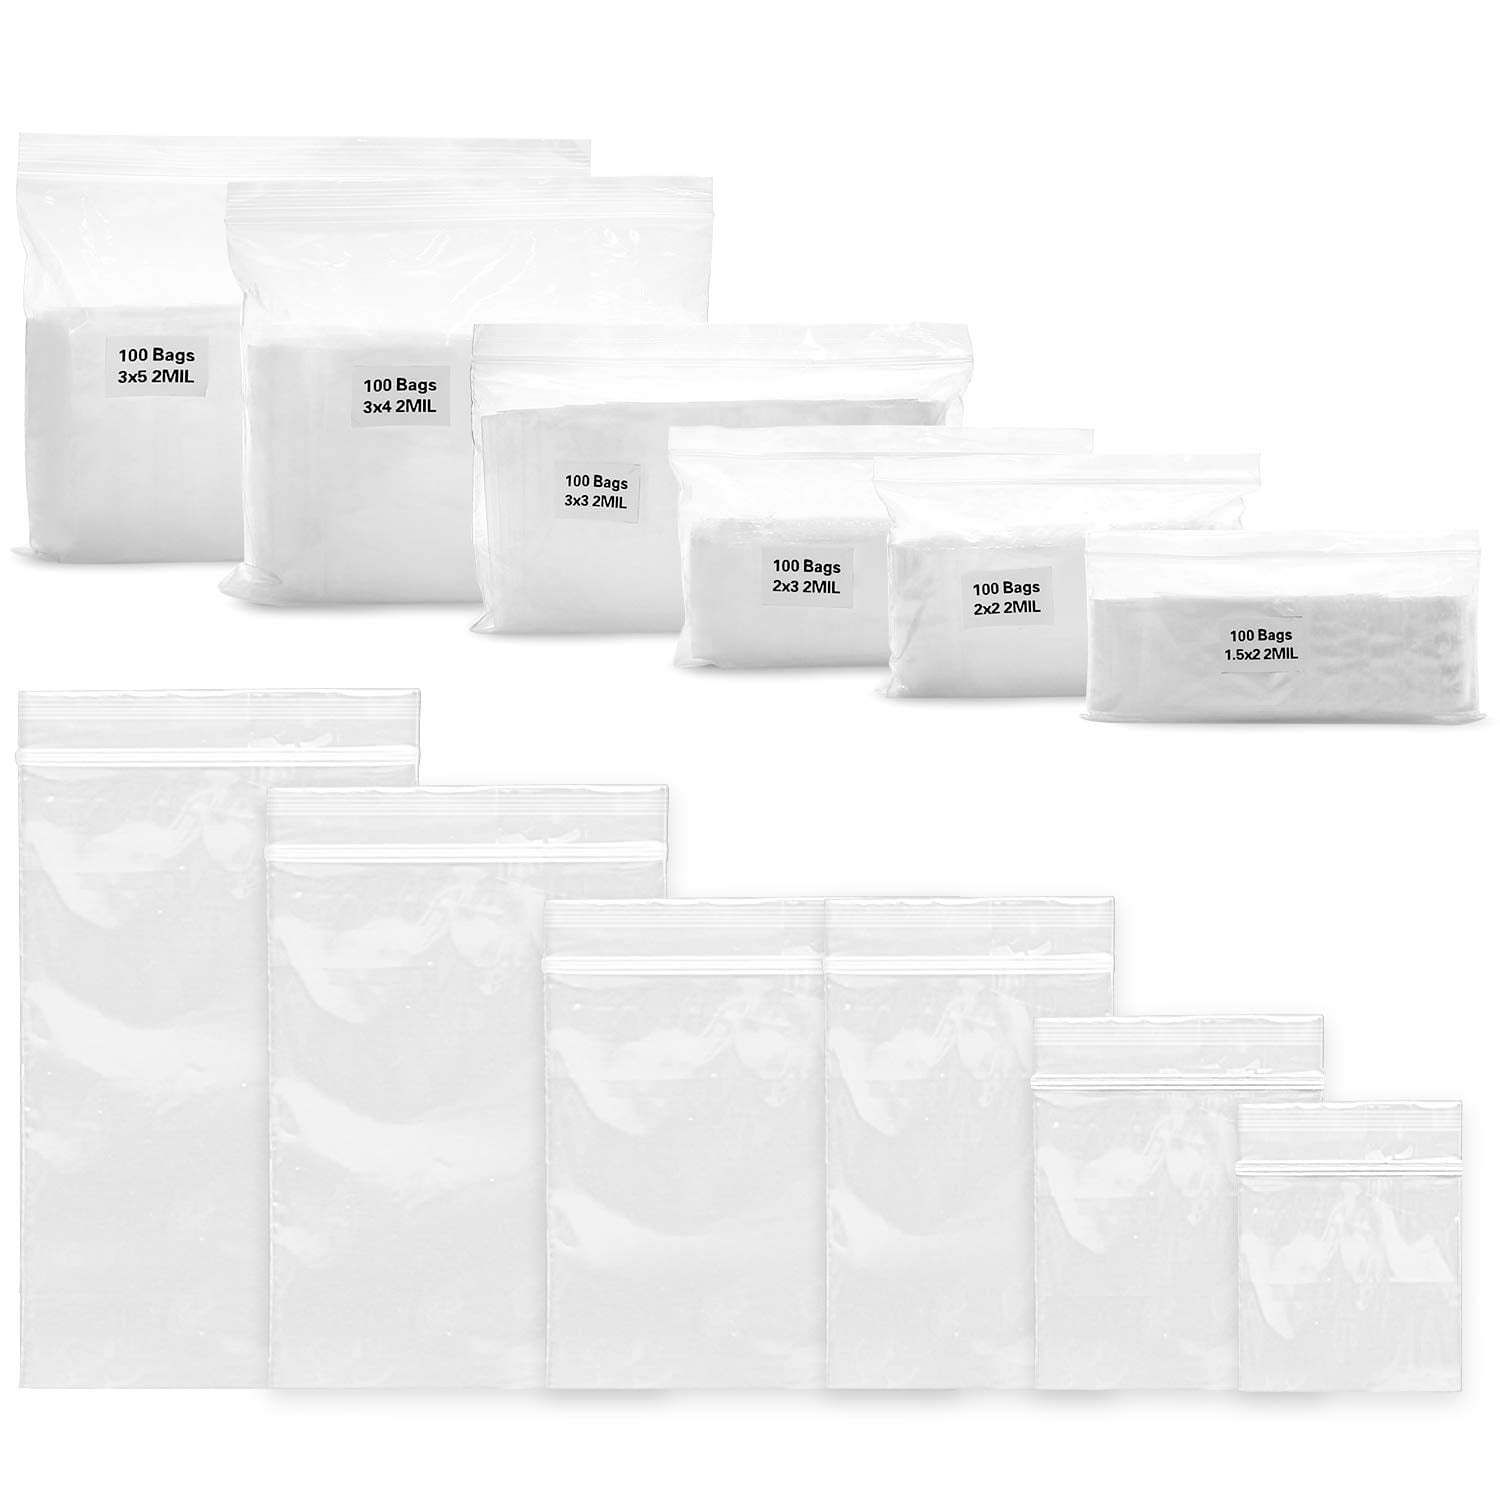 1x1 Inch RESEALABLE Zipper Clear GRIP SEAL Bags Poly Plastic ZIP LOCK 25 